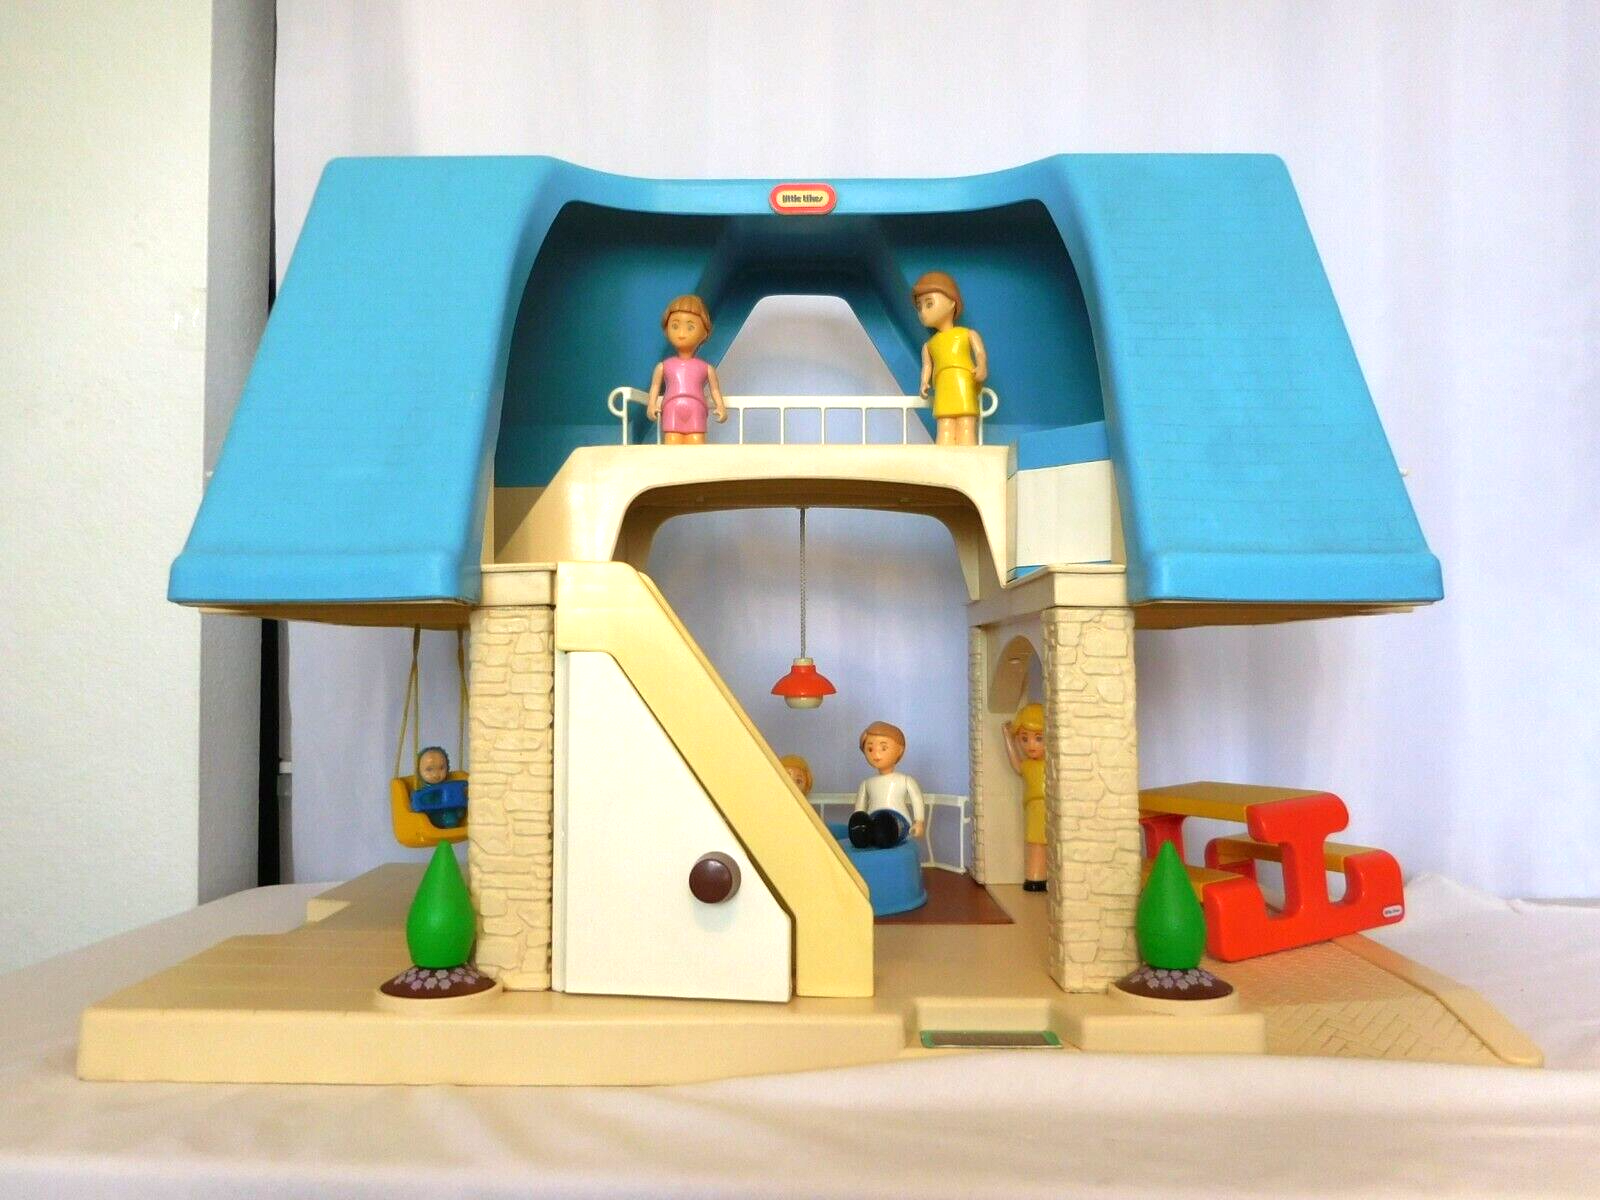 Little Tikes blue roof Doll house + Dolls + accessories + Pool + Picnic Table +  - $99.01